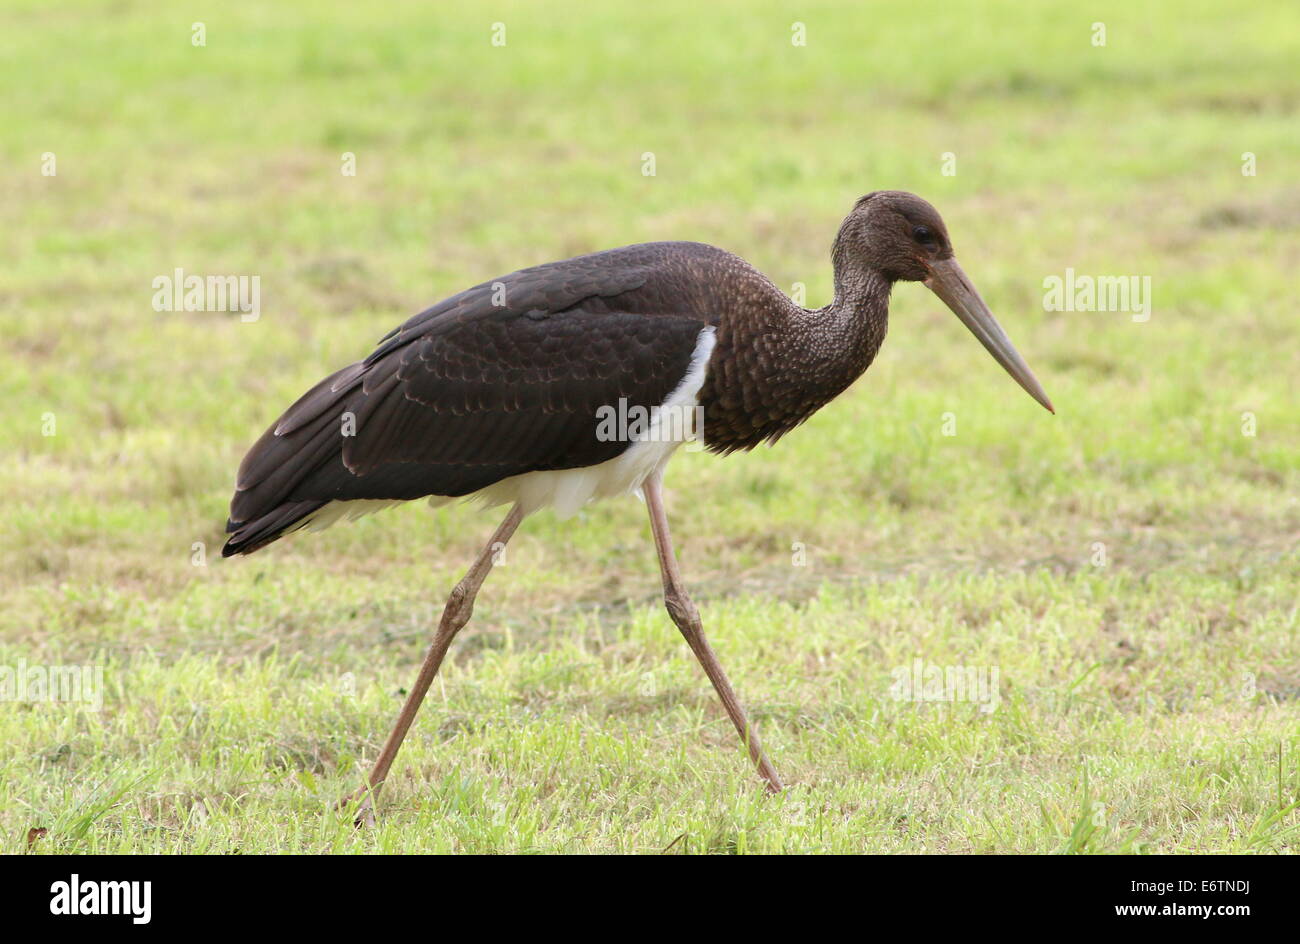 Close-up of a juvenile Black Stork (Ciconia nigra) foraging in a meadow Stock Photo